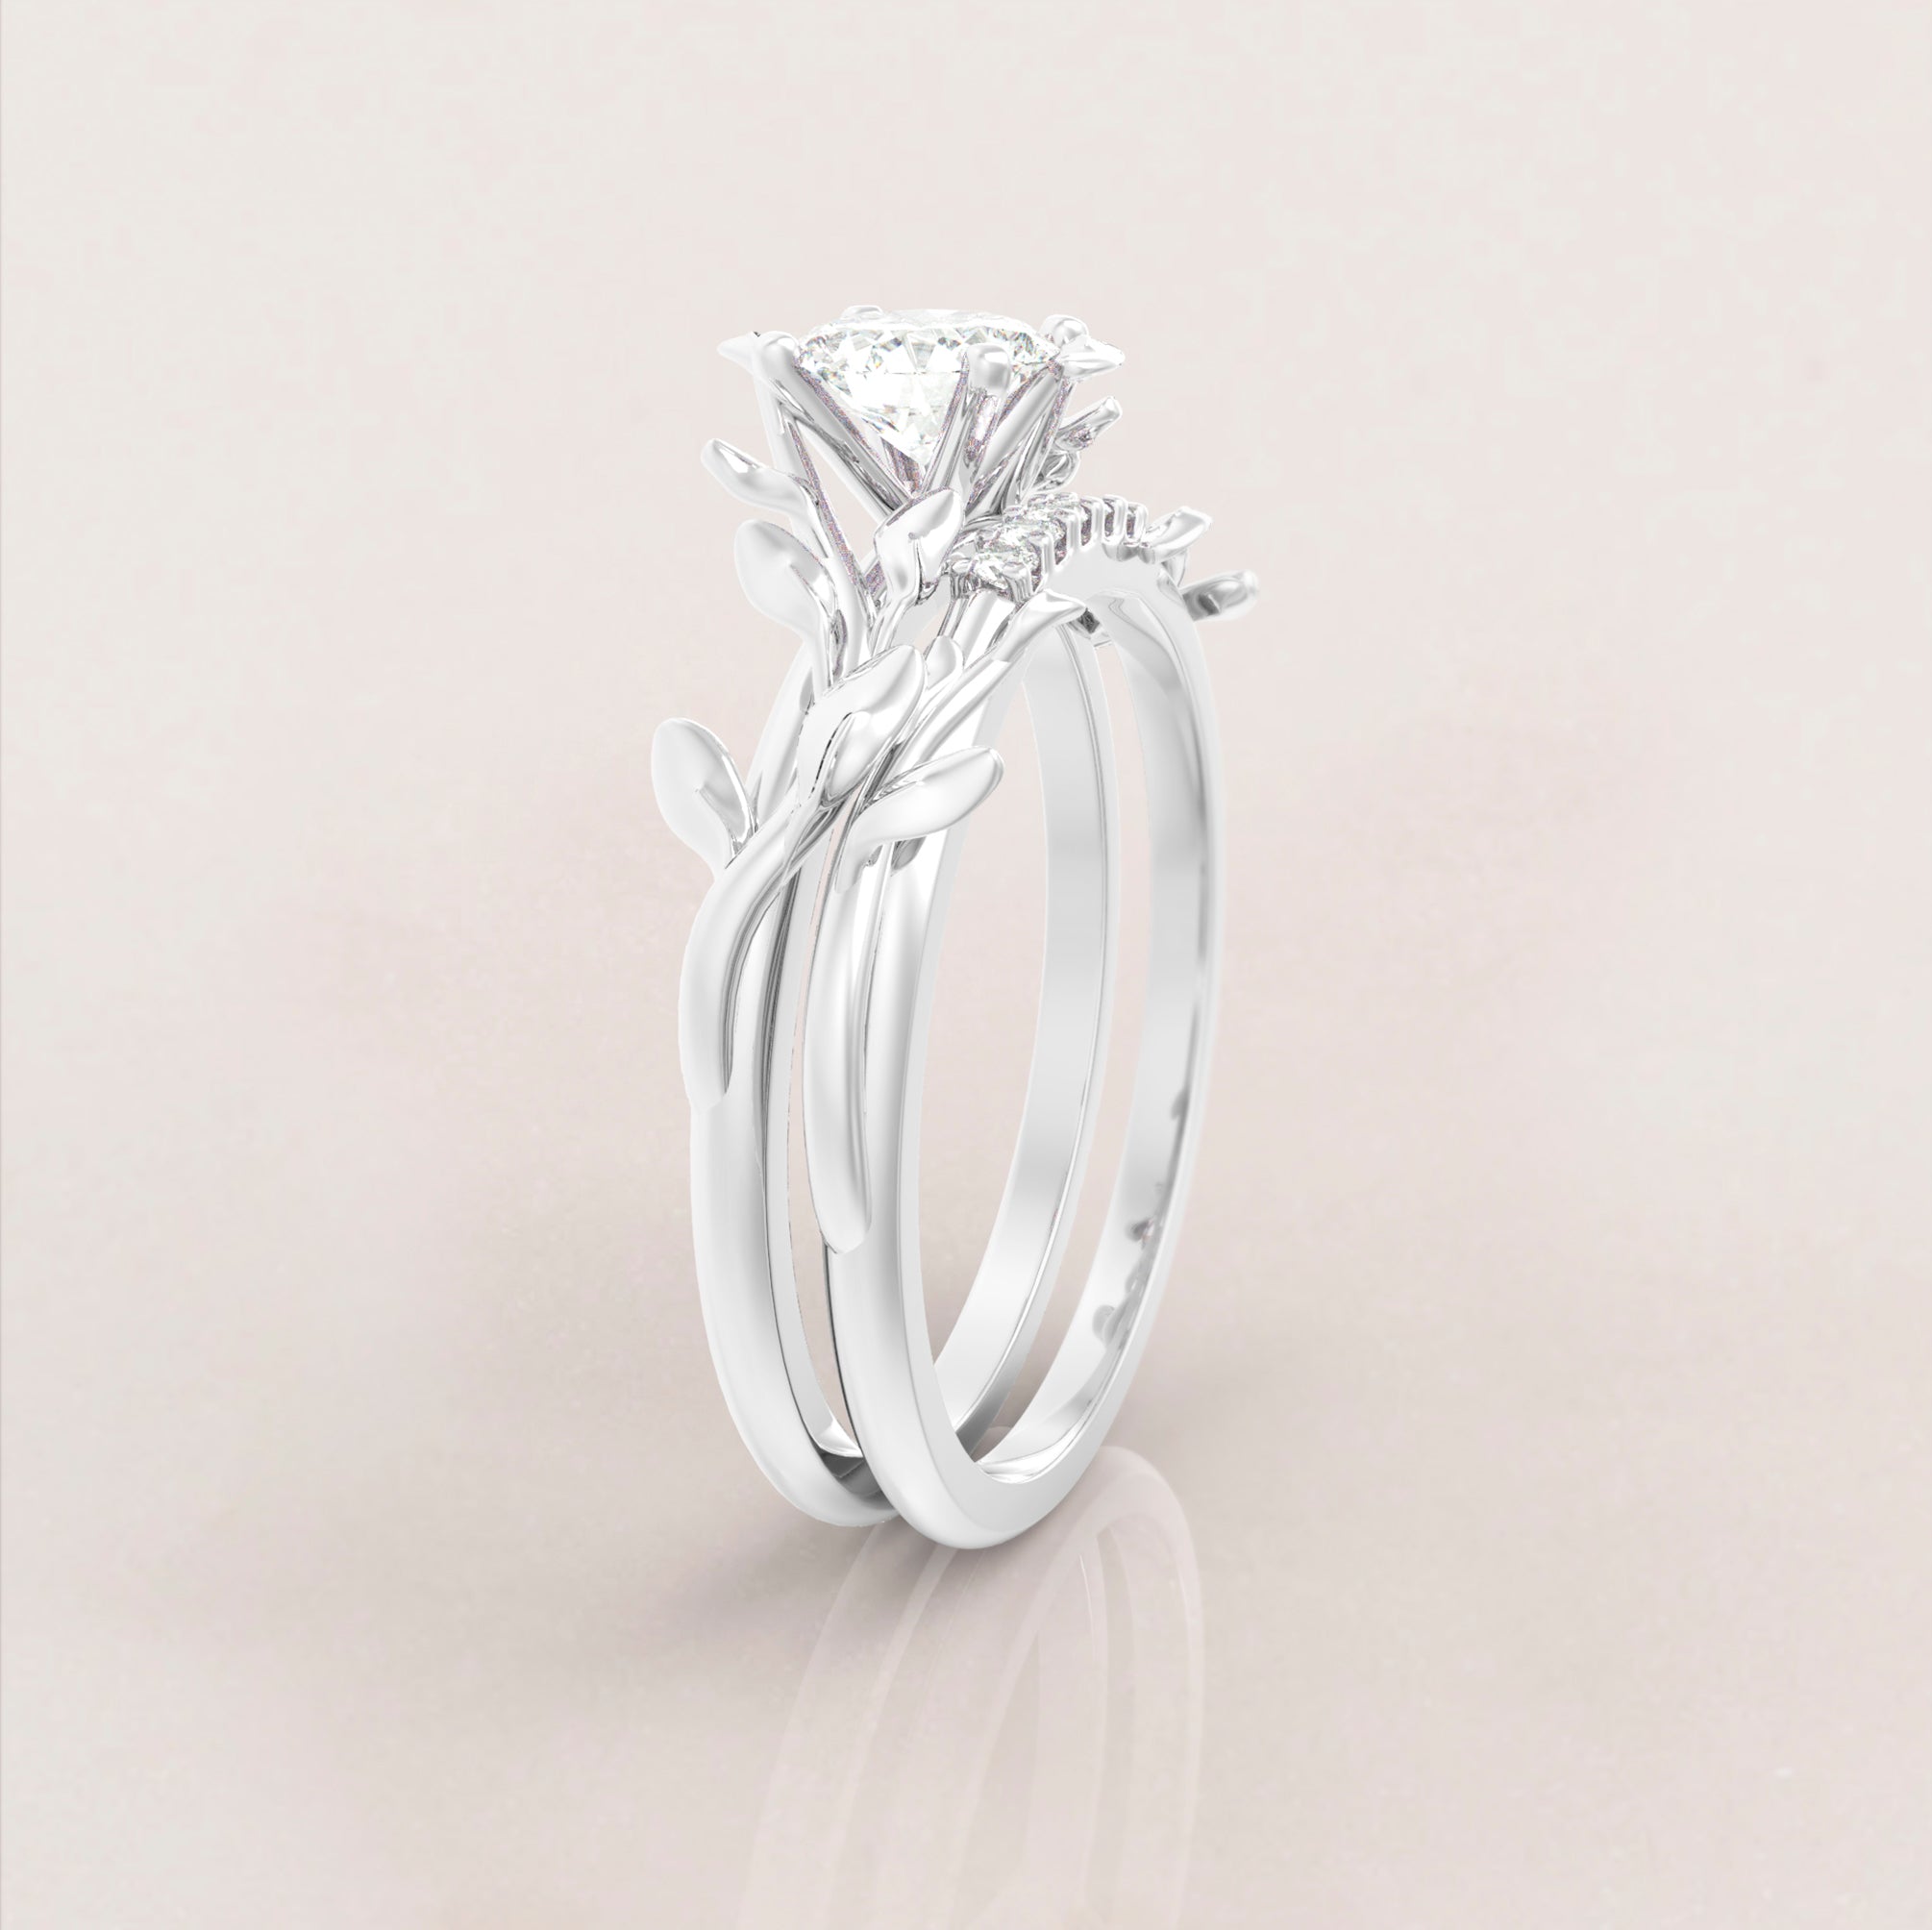 Unique Leaves Engagement and Wedding Engagement Ring Set No.5 in White Gold - Diamond/Moissanite - Roelavi